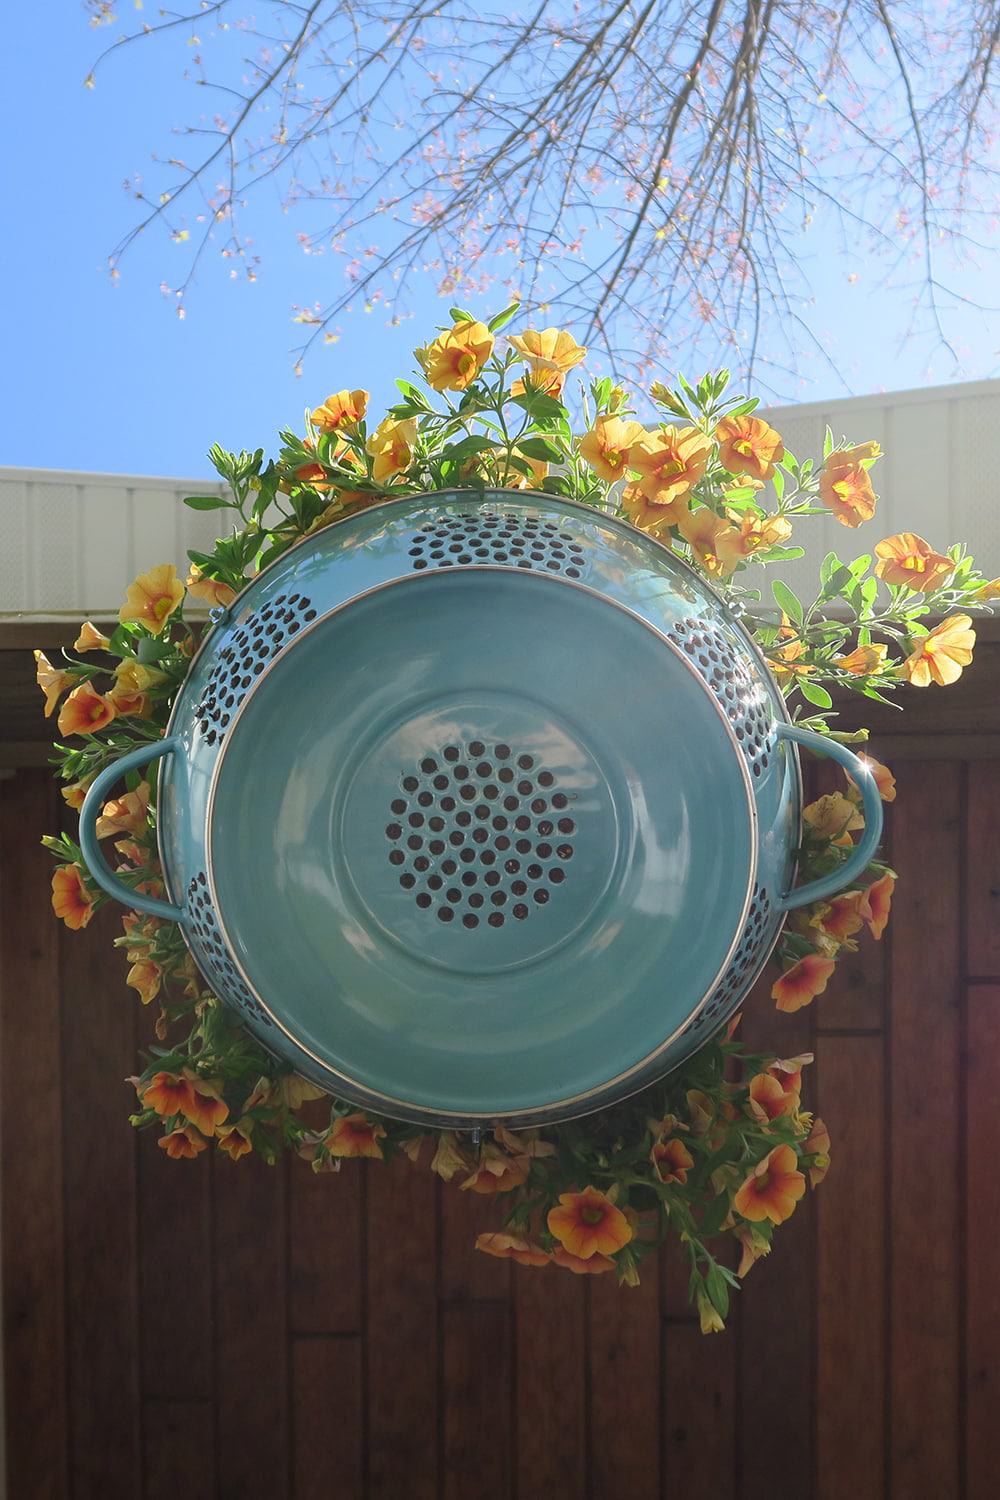 Container gardening just got more fun! With just a few supplies, you can turn a simple kitchen utensil into a unique DIY Hanging Colander Planter.